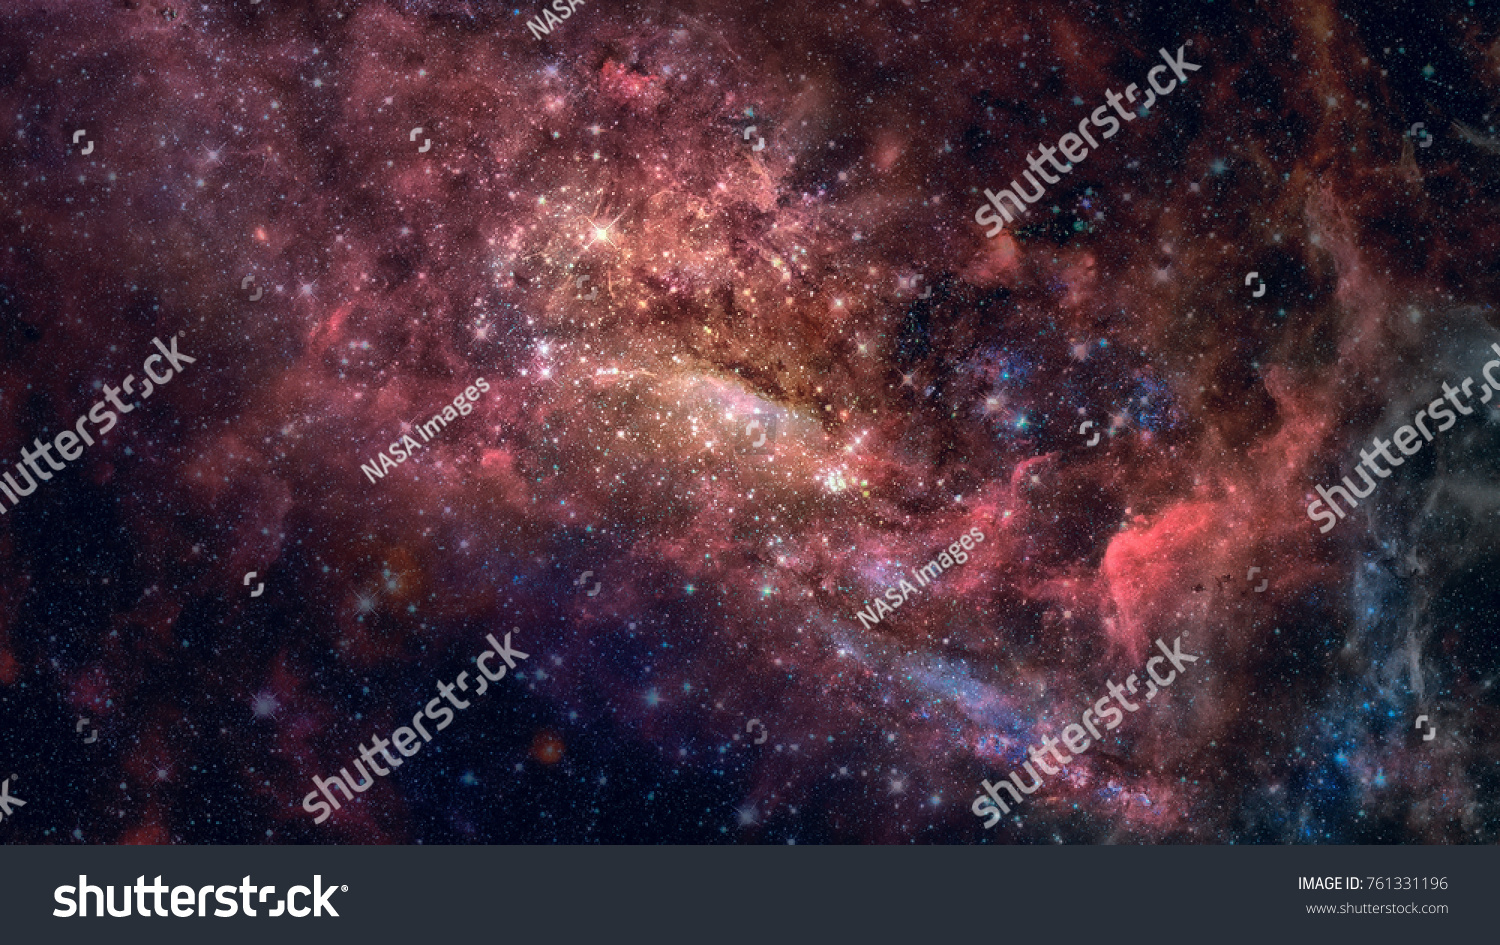 Nebula and galaxies in space. Elements of this image furnished by NASA. #761331196